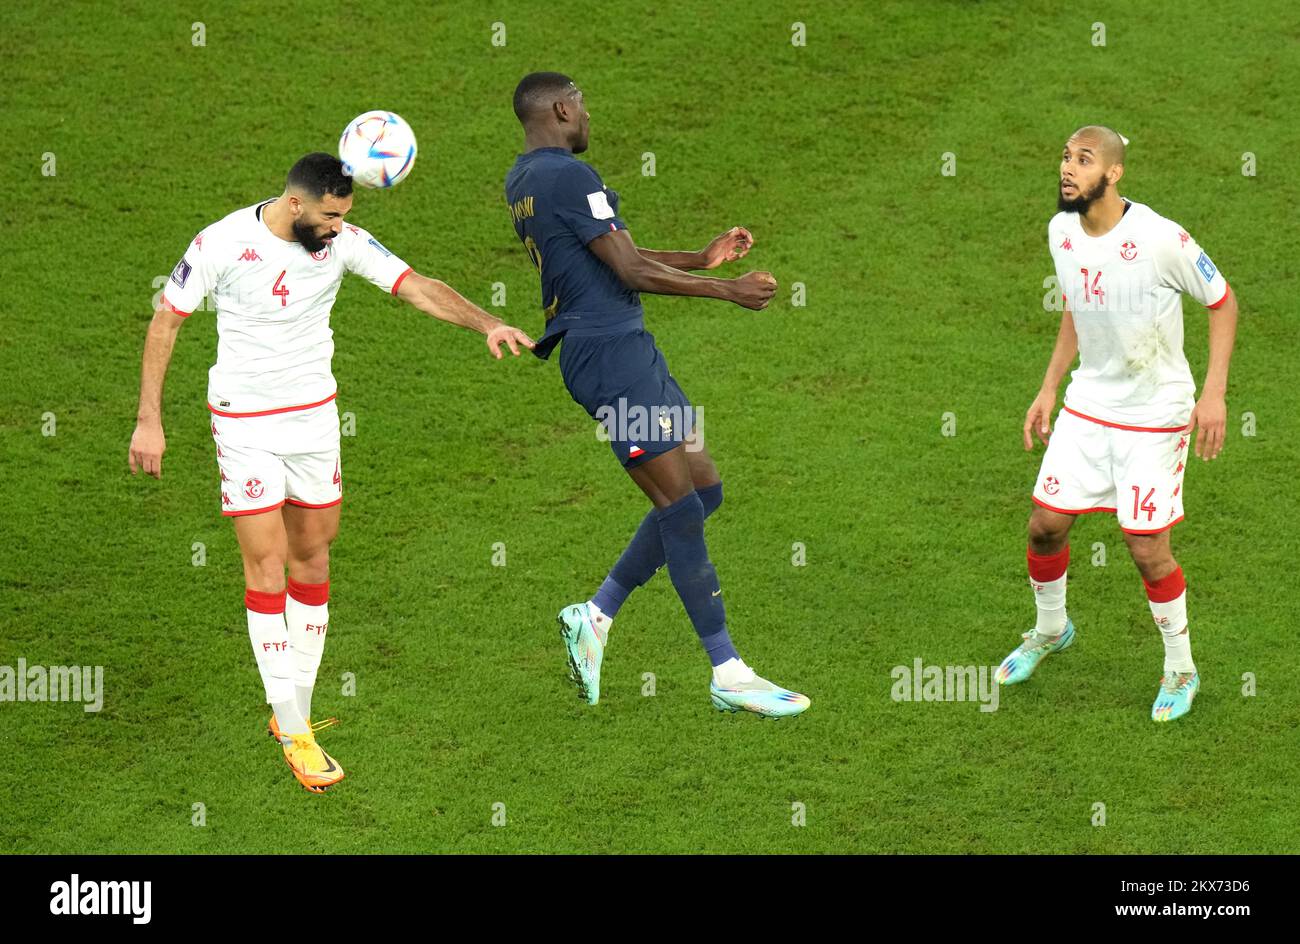 France's Randal Kolo Muani (centre) battles for the ball with Tunisia's Yassine Meriah (left) and Aissa Laidouni during the FIFA World Cup Group D match at the Education City Stadium in Al Rayyan, Qatar. Picture date: Wednesday November 30, 2022. Stock Photo